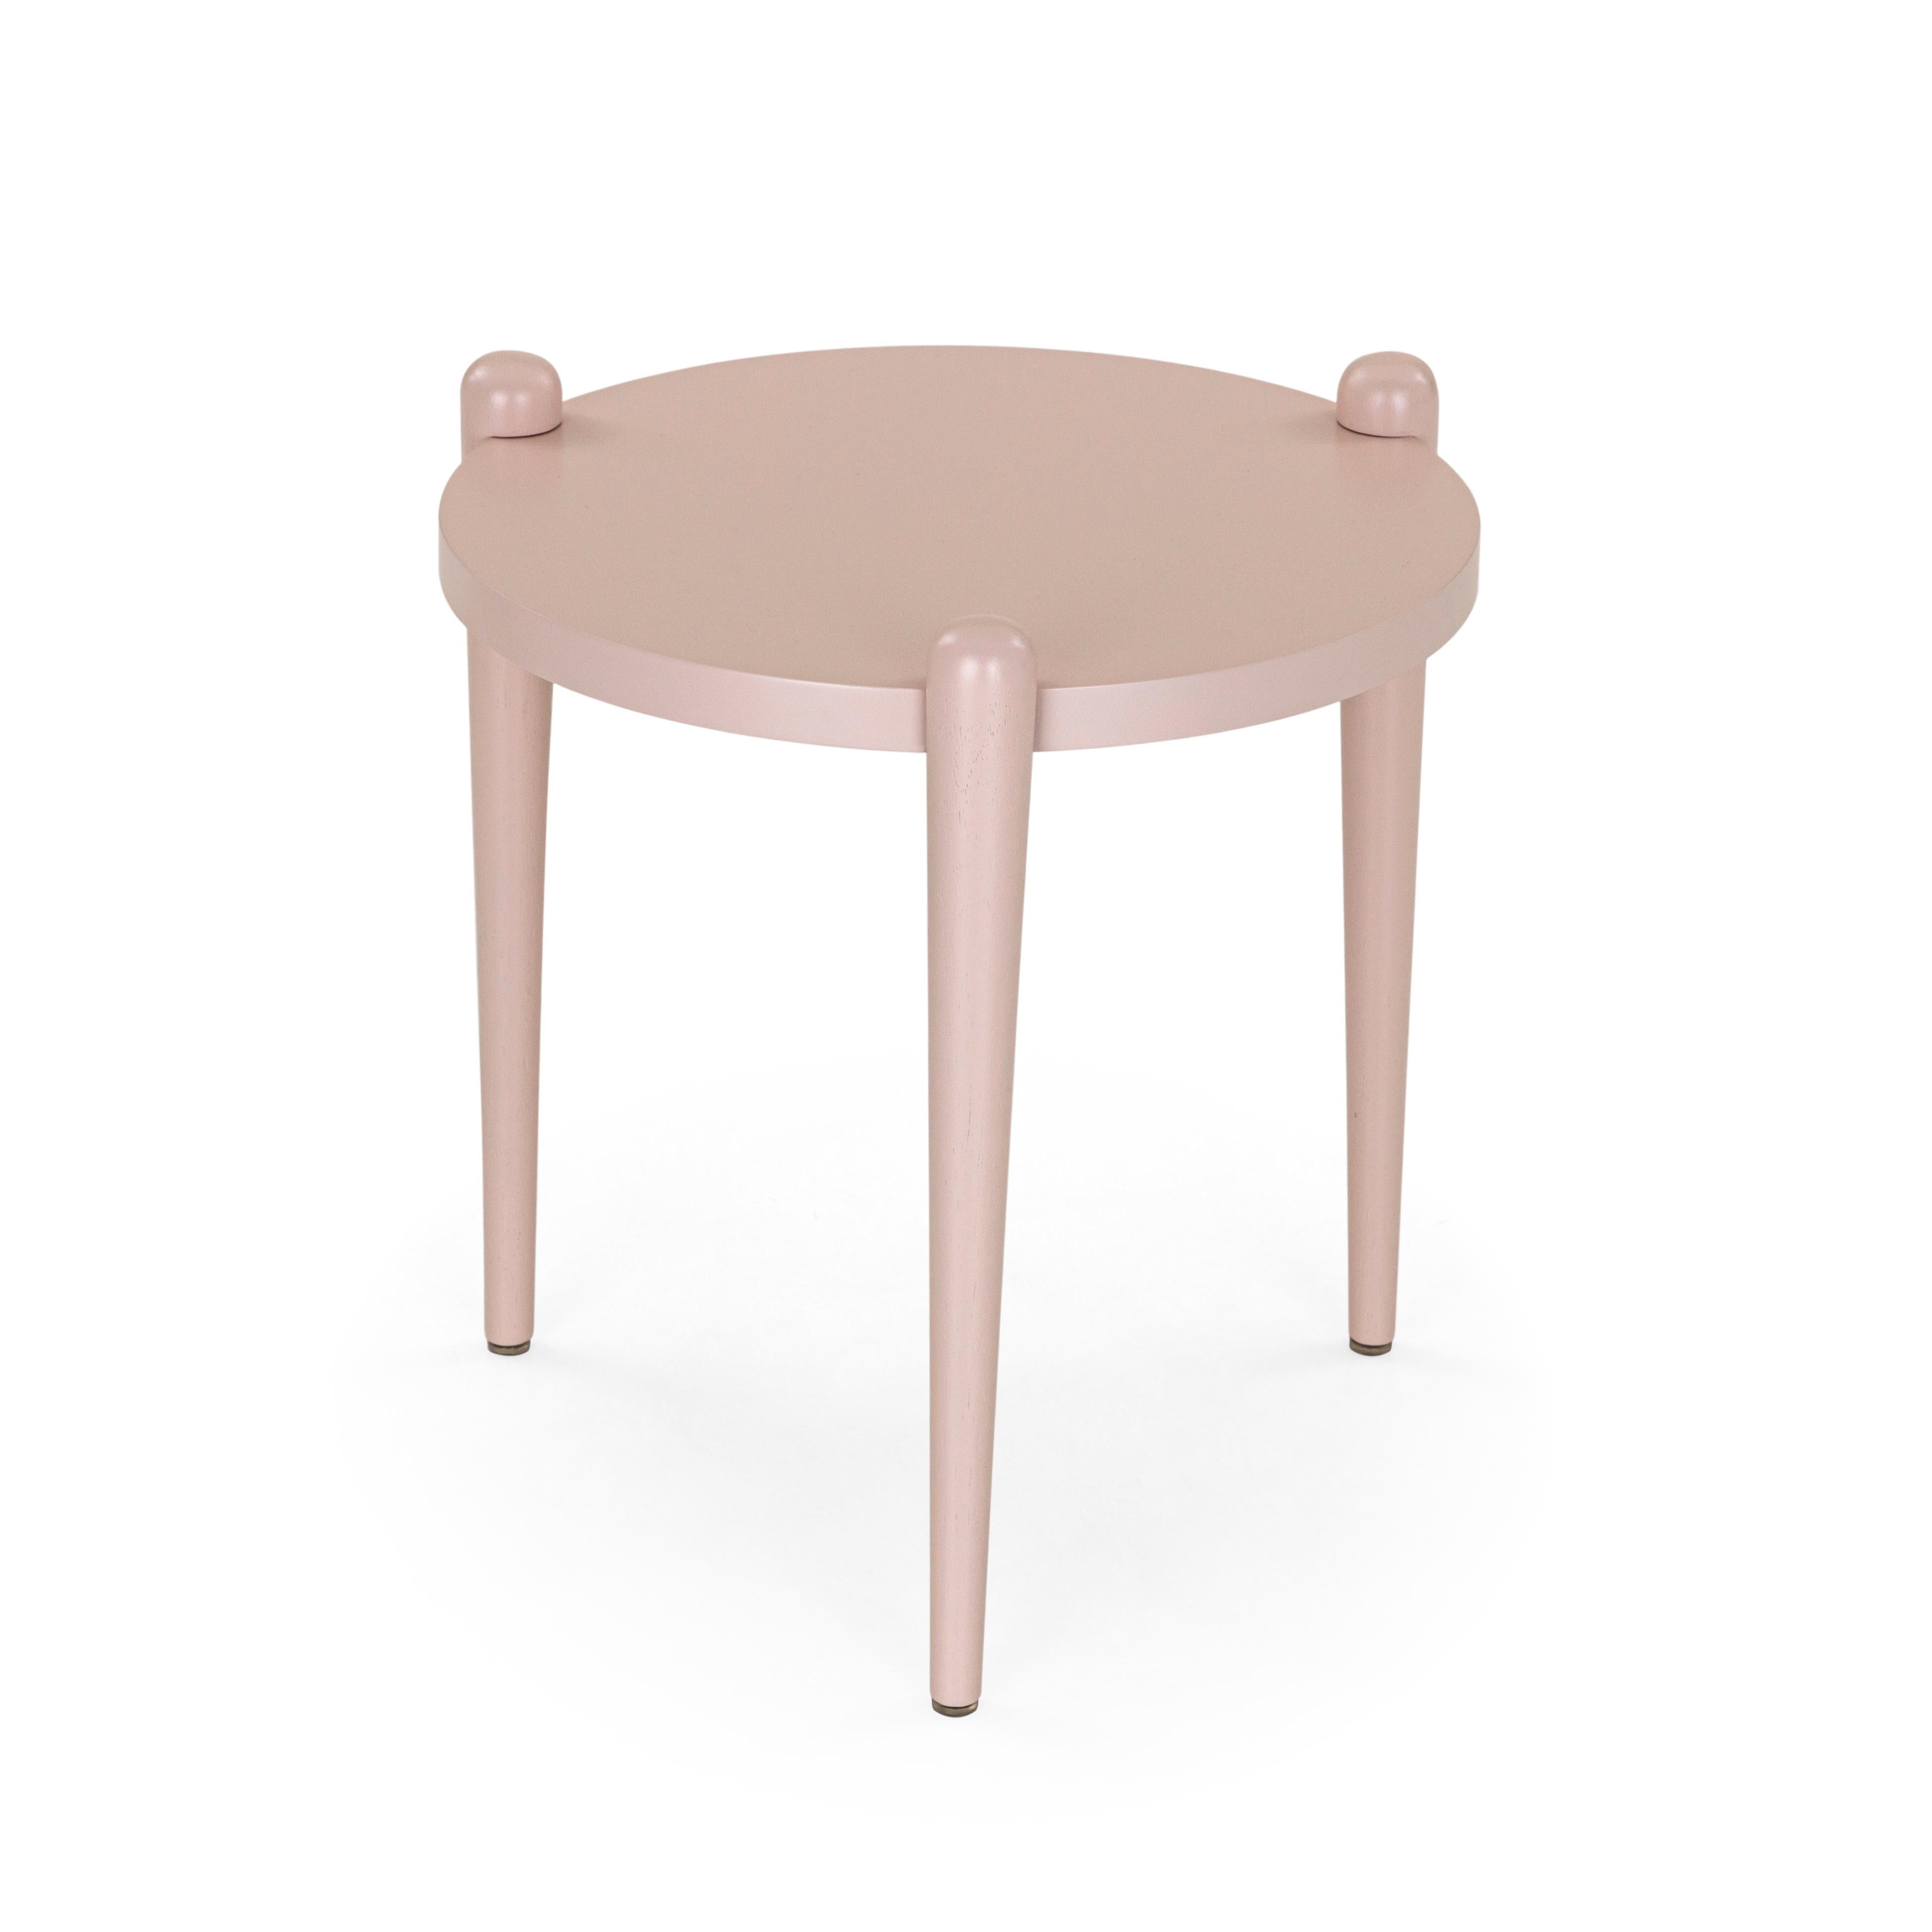 Brazilian Pan Contemporary Side Tables in Light Pink Quartz Finish, Set of 3 For Sale